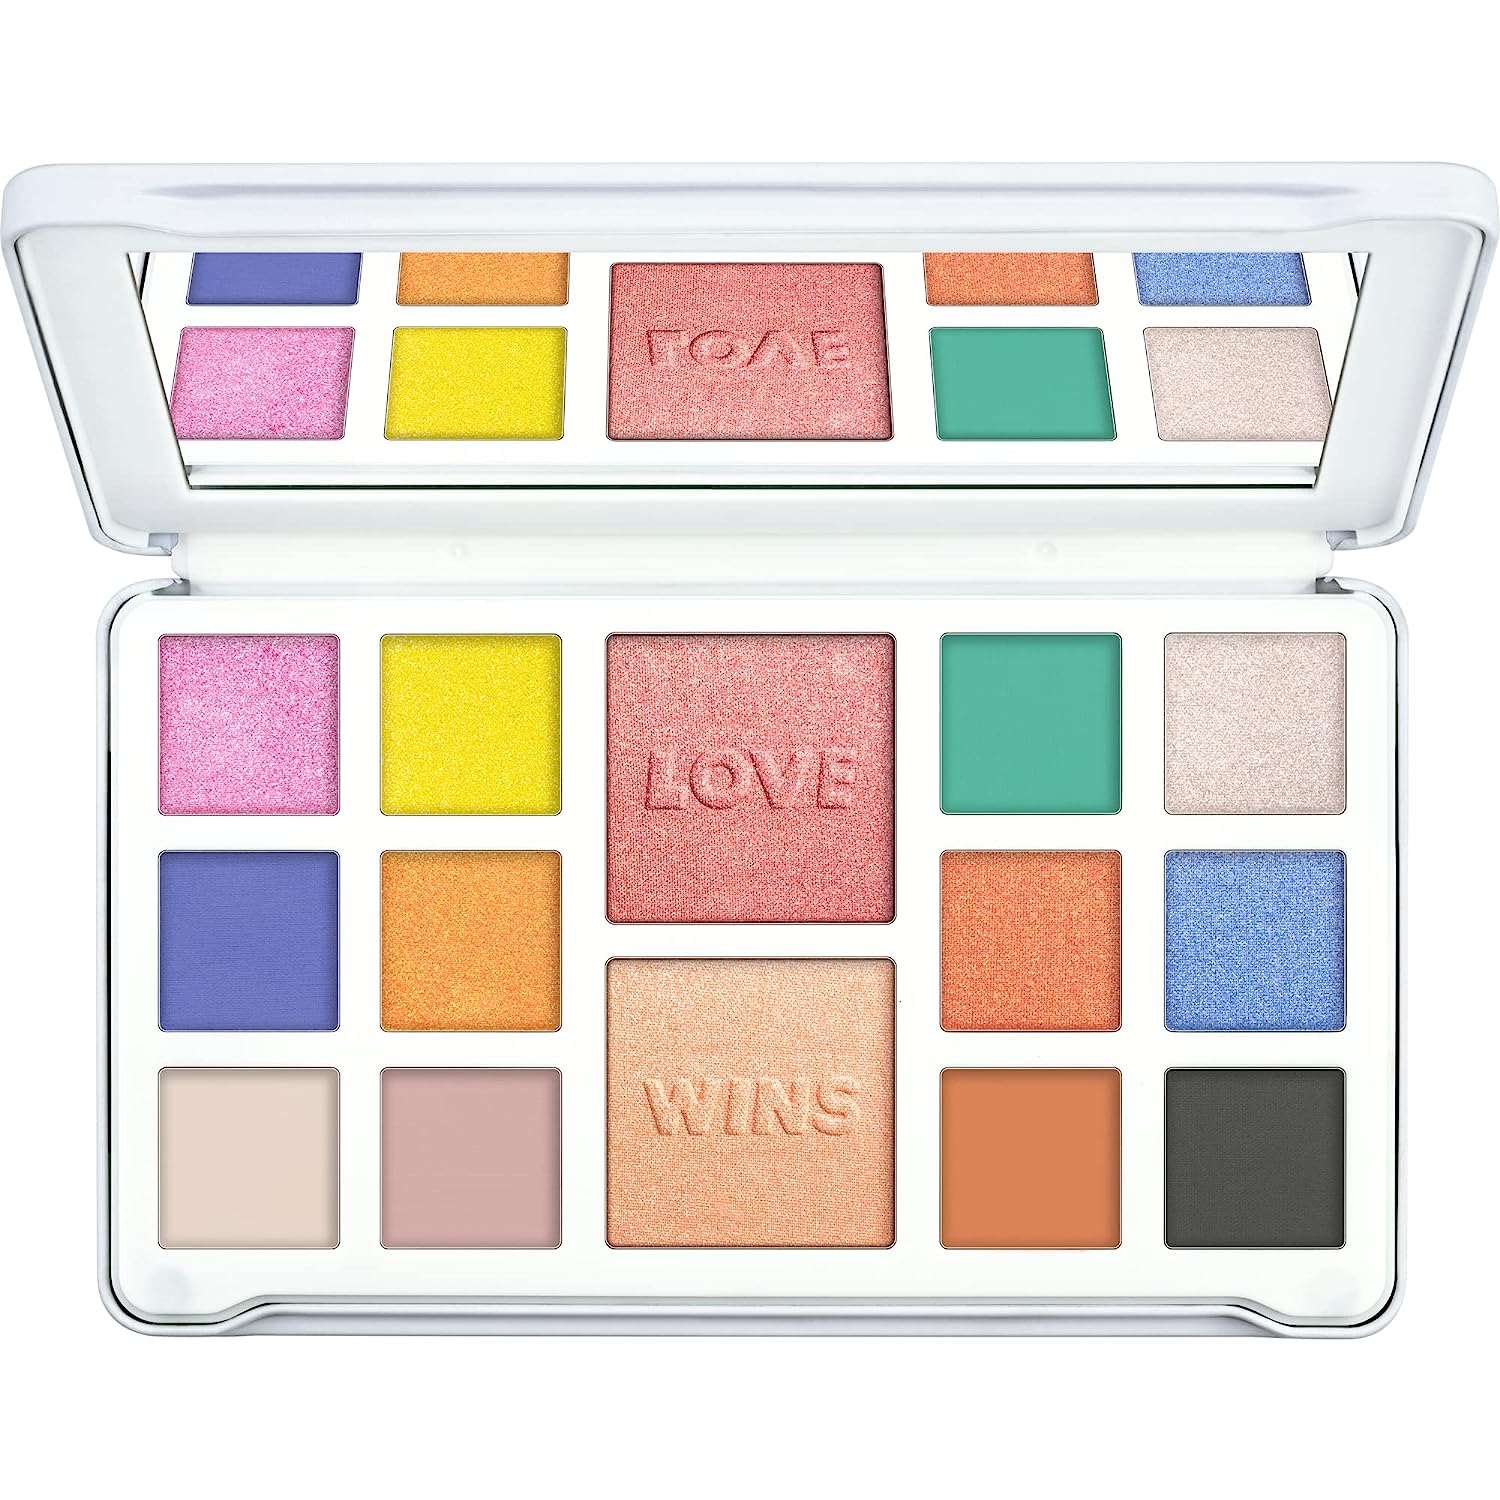 Catrice WHO I AM Eyeshadow & Face Palette, No. C01, Multicoloured, 14 Colours, Express Result, Shimmering, Vegan, No Microplastic Particles, Nanoparticles Free, No Perfume, Pack of 1 (23.8 g)